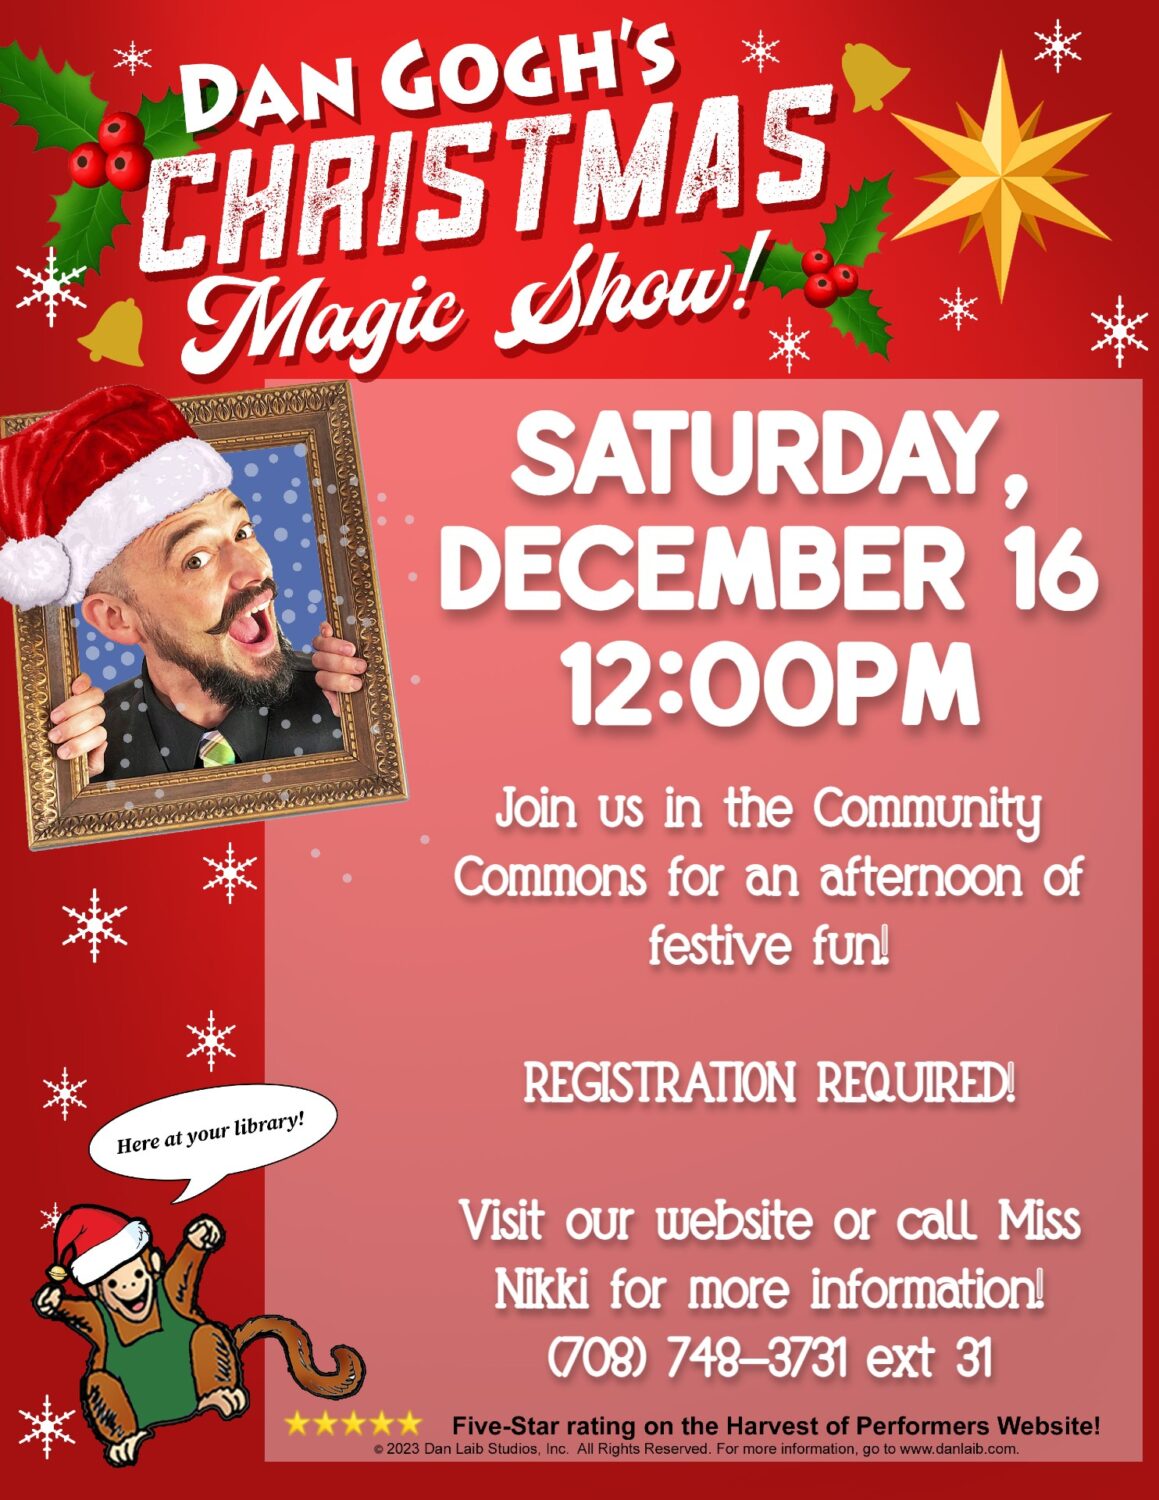 poster with picture of man wearing Santa hat holding a frame around his head